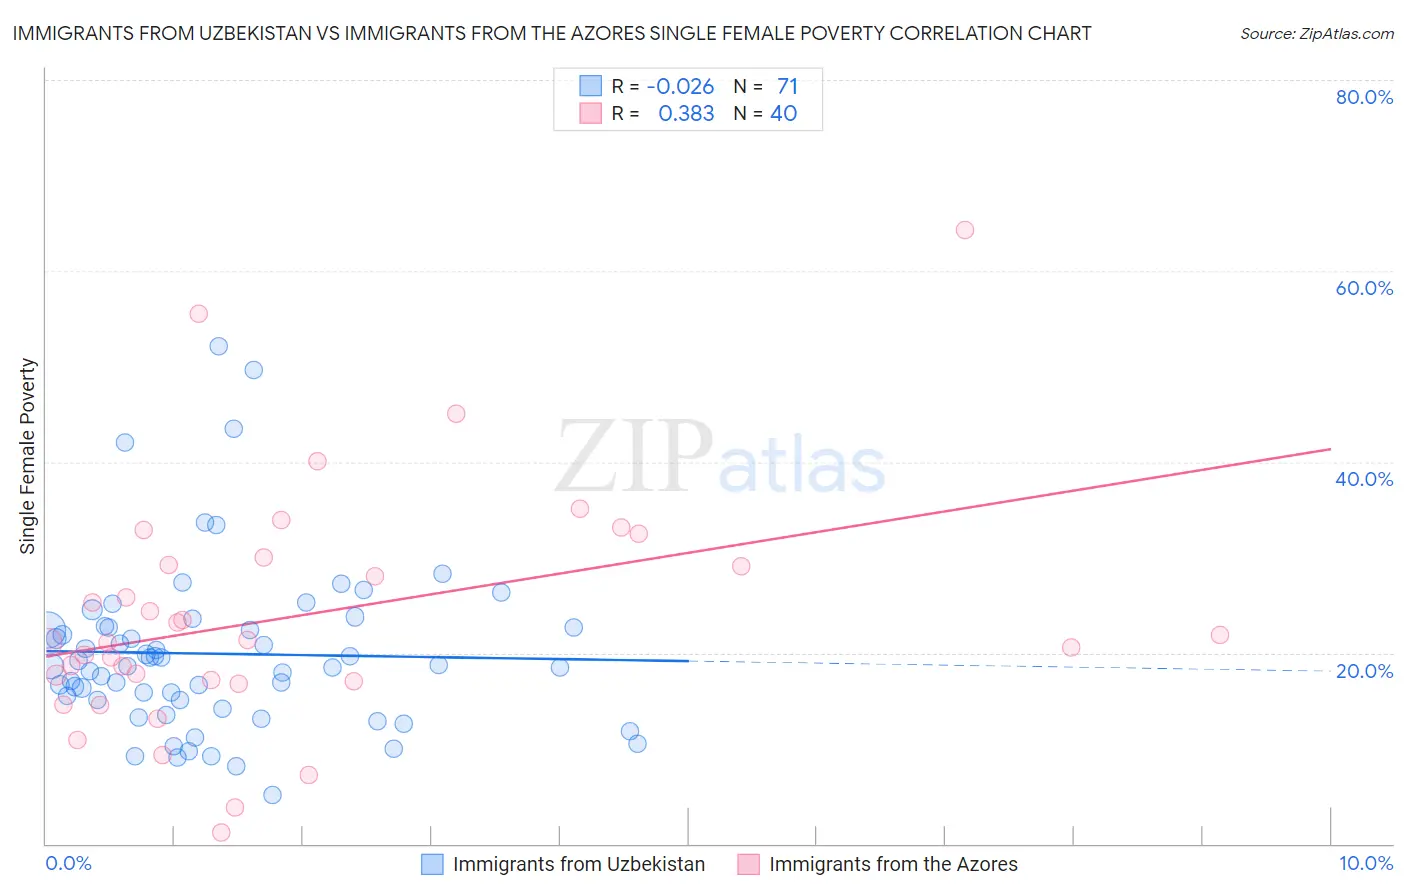 Immigrants from Uzbekistan vs Immigrants from the Azores Single Female Poverty